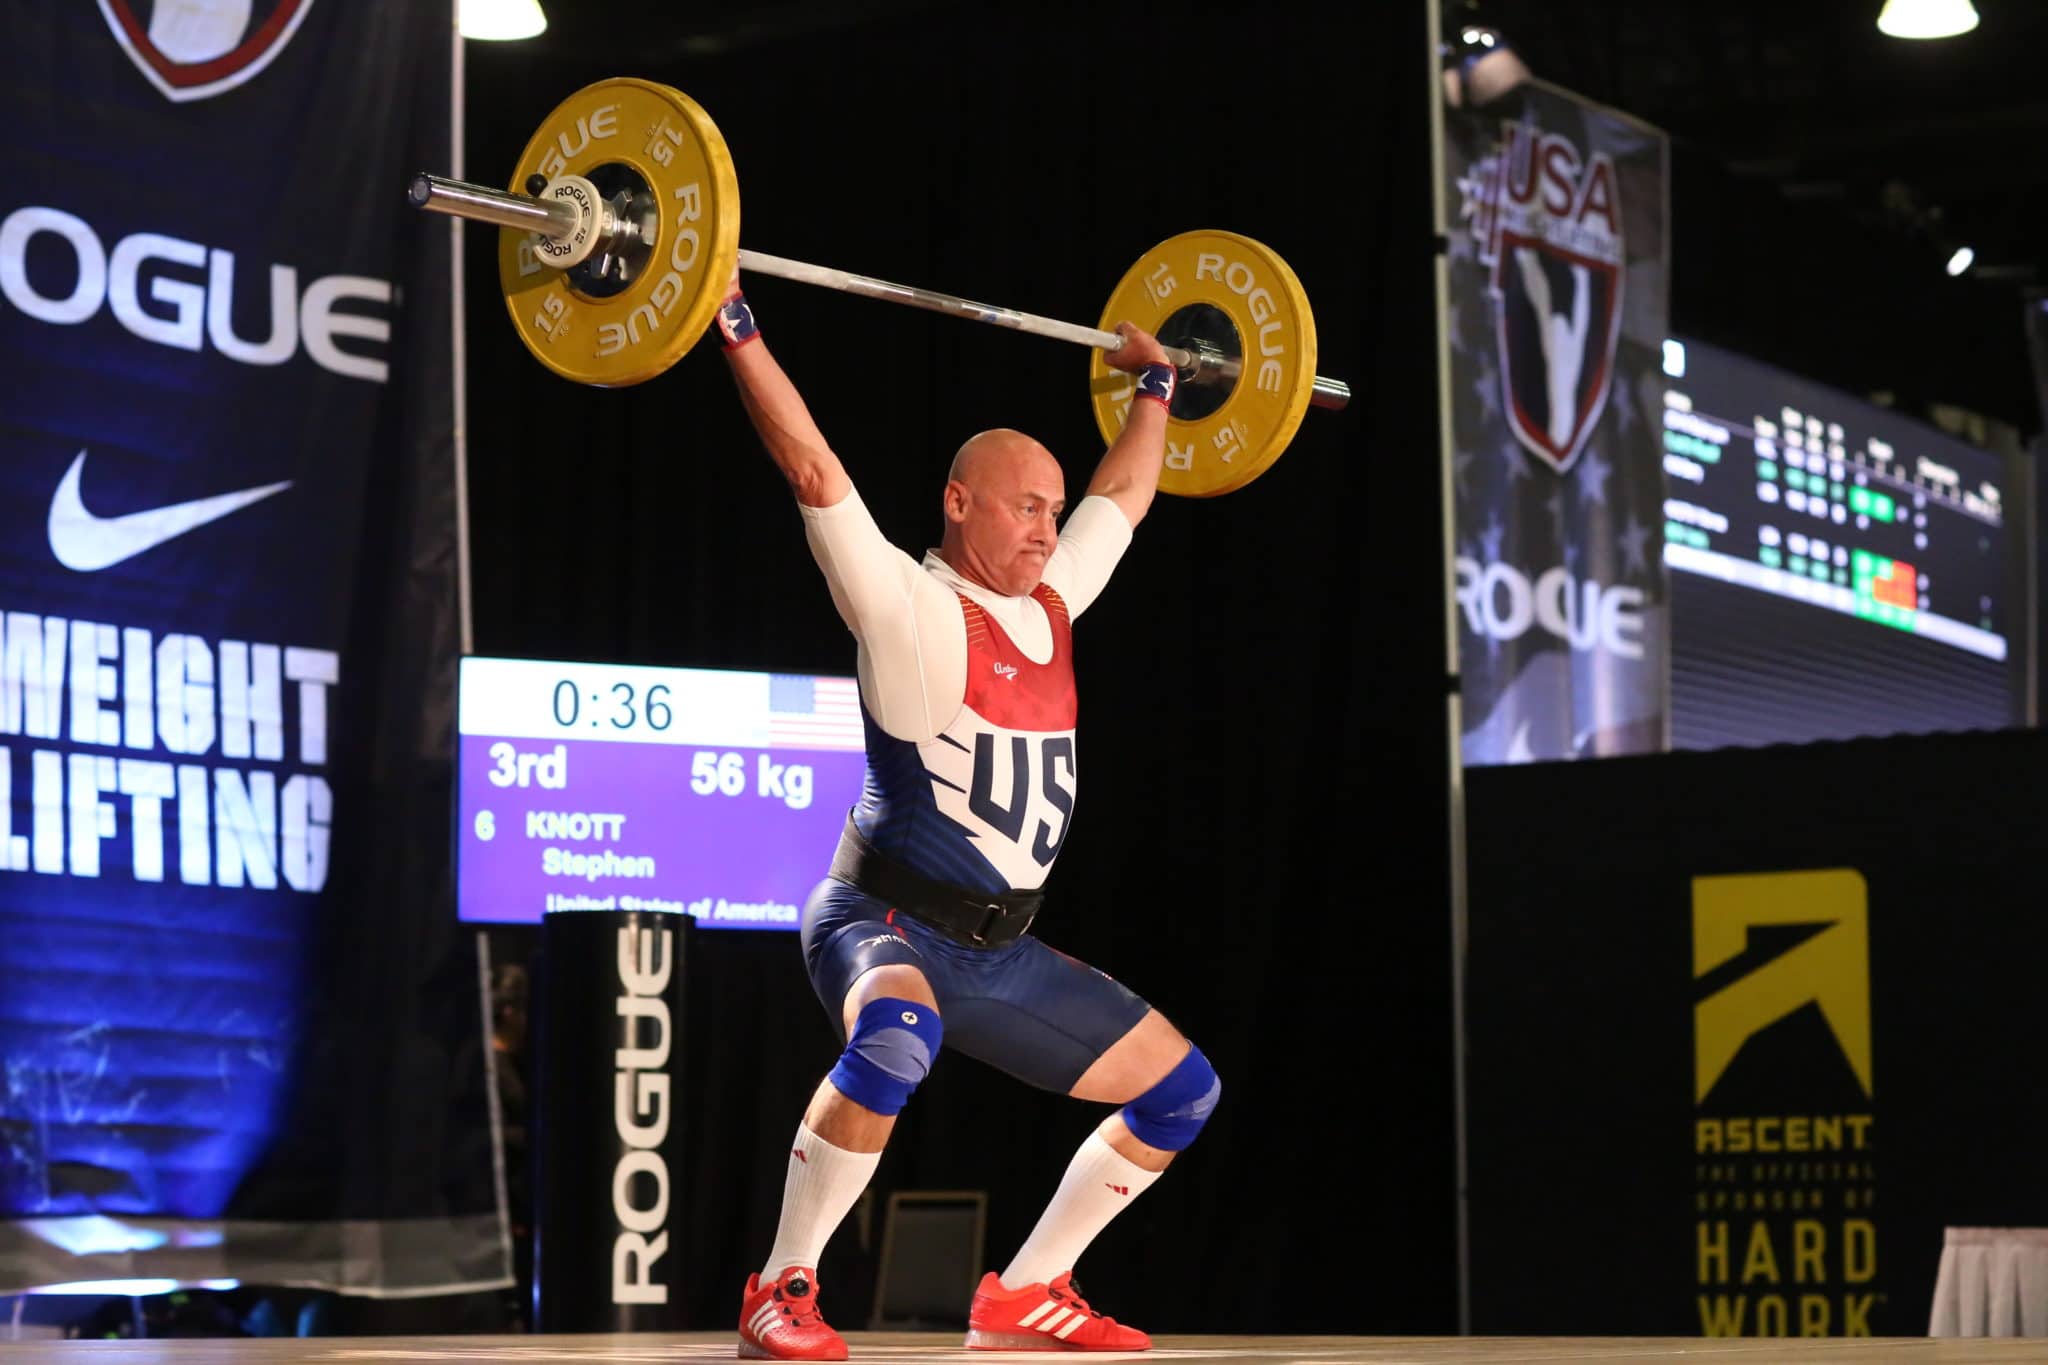 Dr. Knott competed and won in the 89 kilogram weight class for 65-69 year olds at the 2019 World Cup Masters Weightlifting Championships